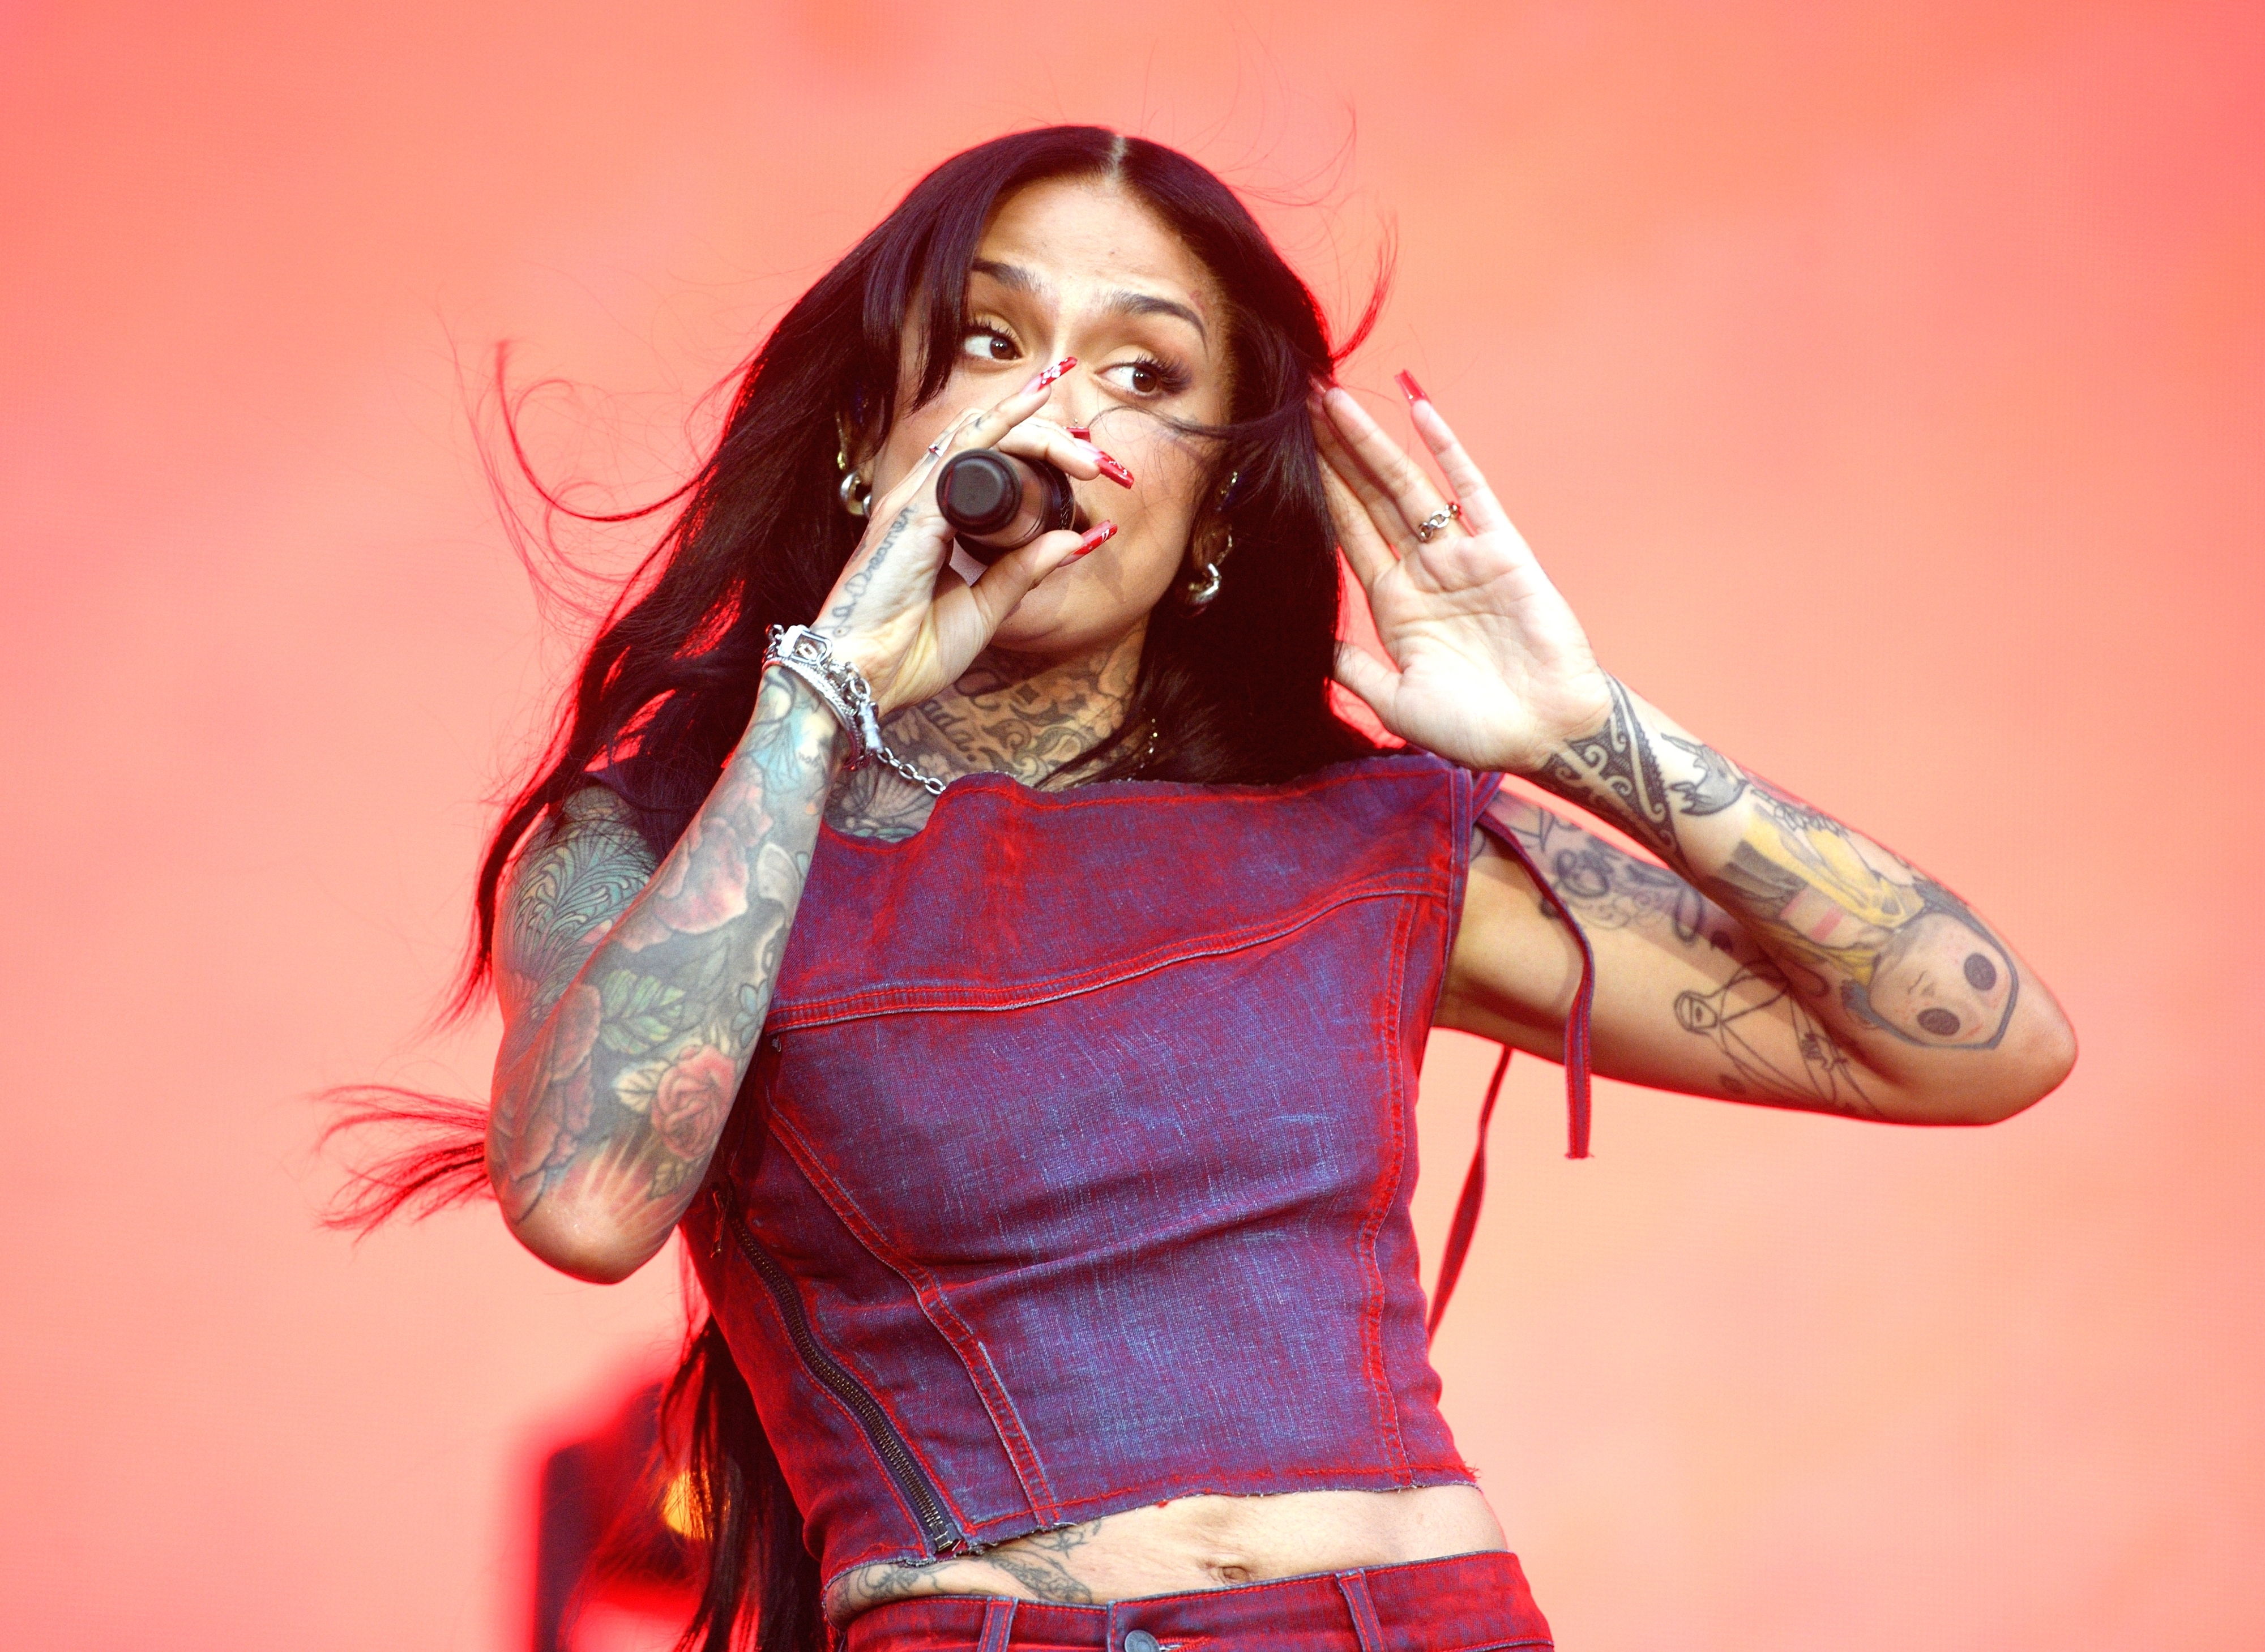 Kehlani performs onstage wearing a denim outfit, with a microphone in hand